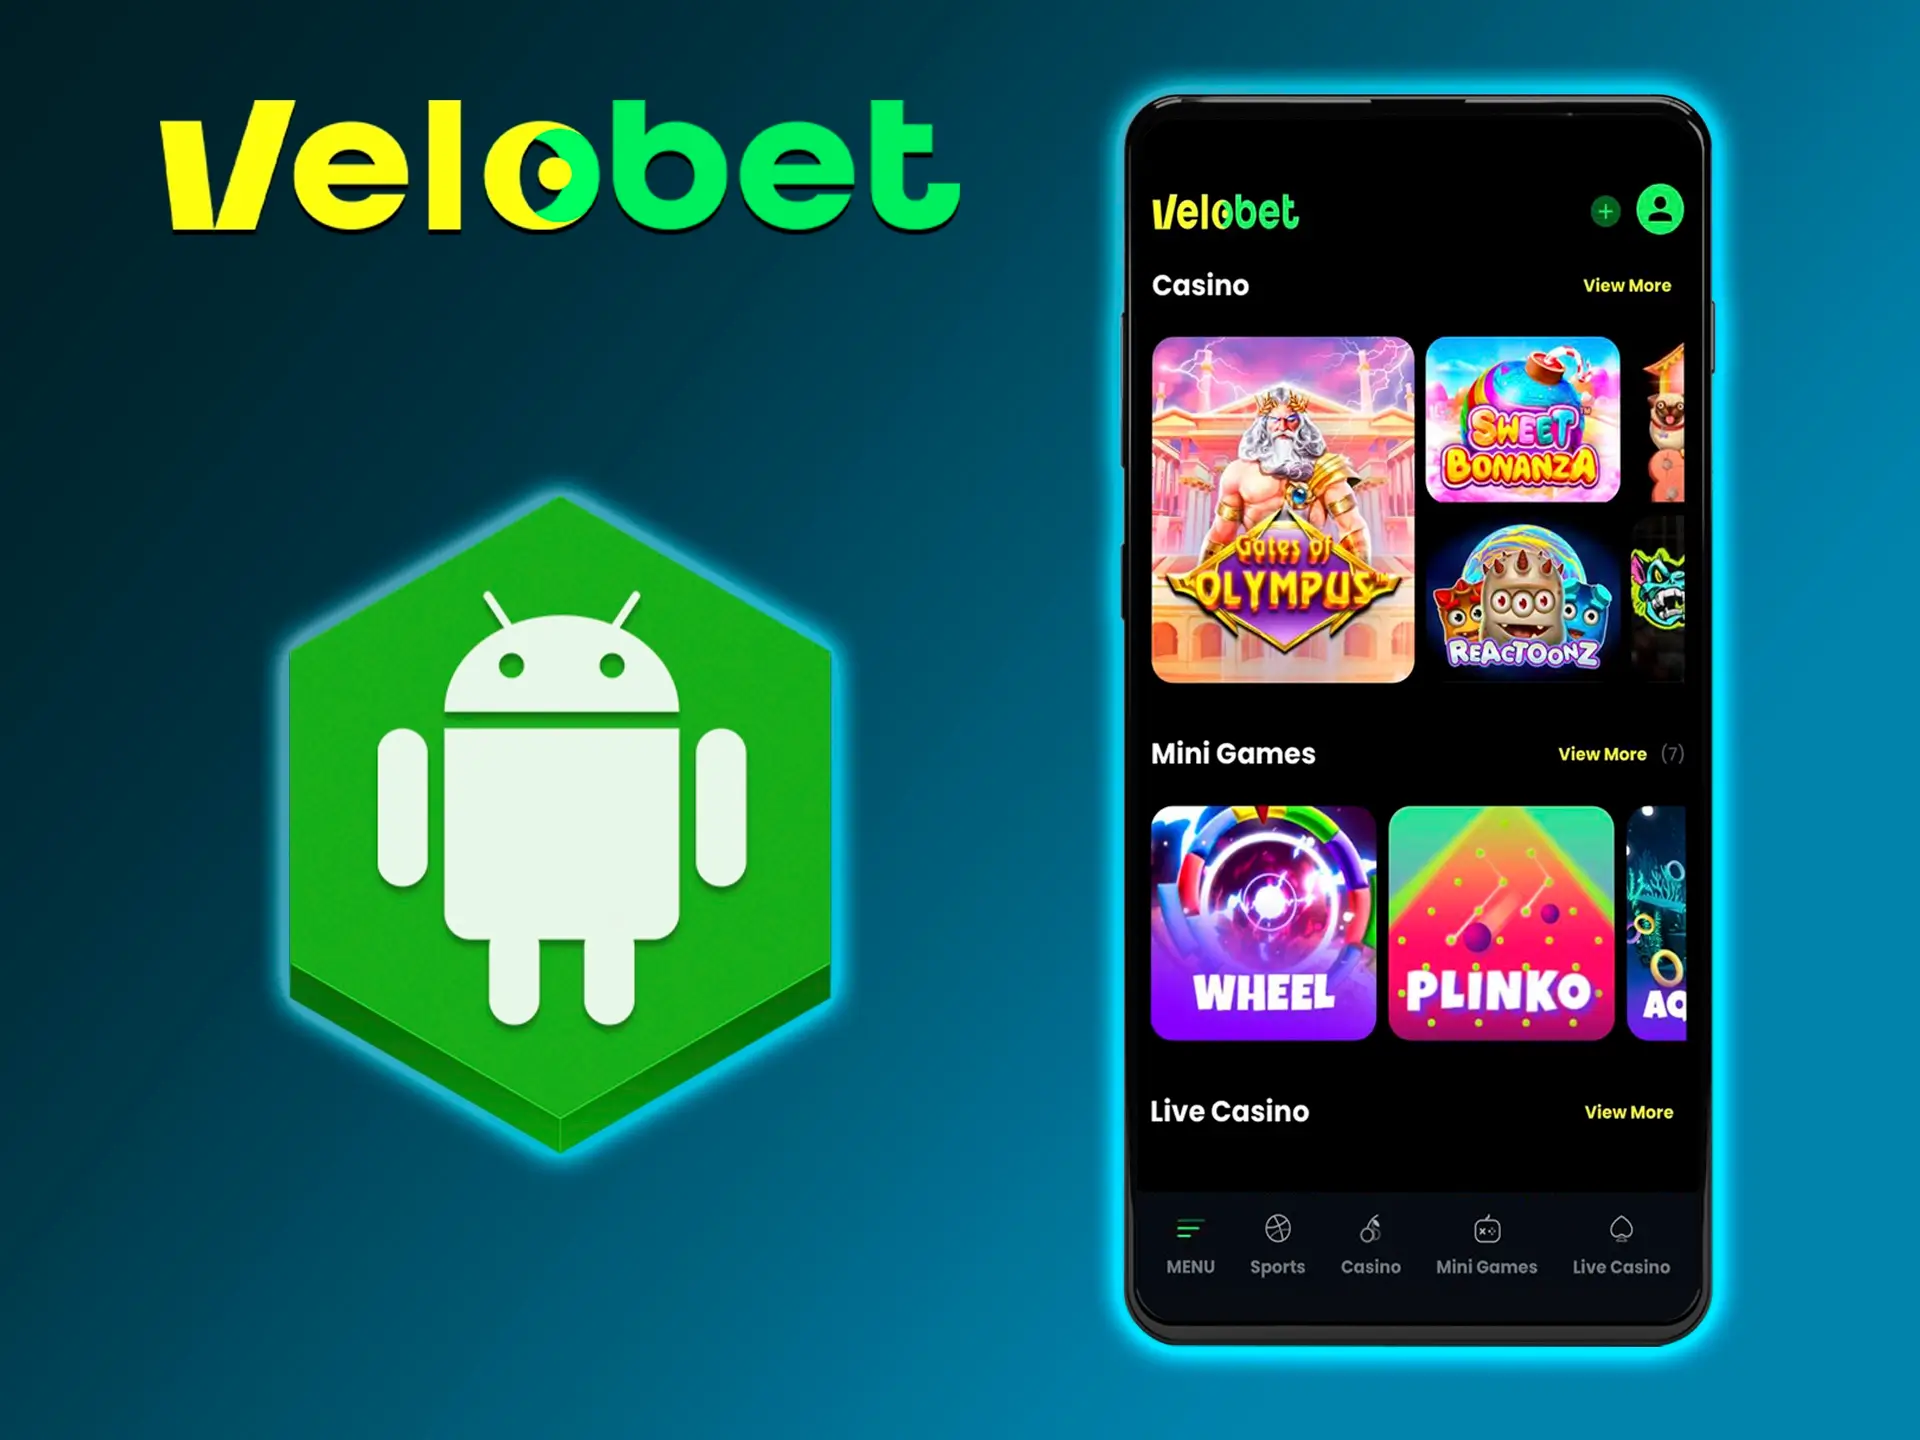 The Velobet app for Android launches perfectly and shows great performance on any device.